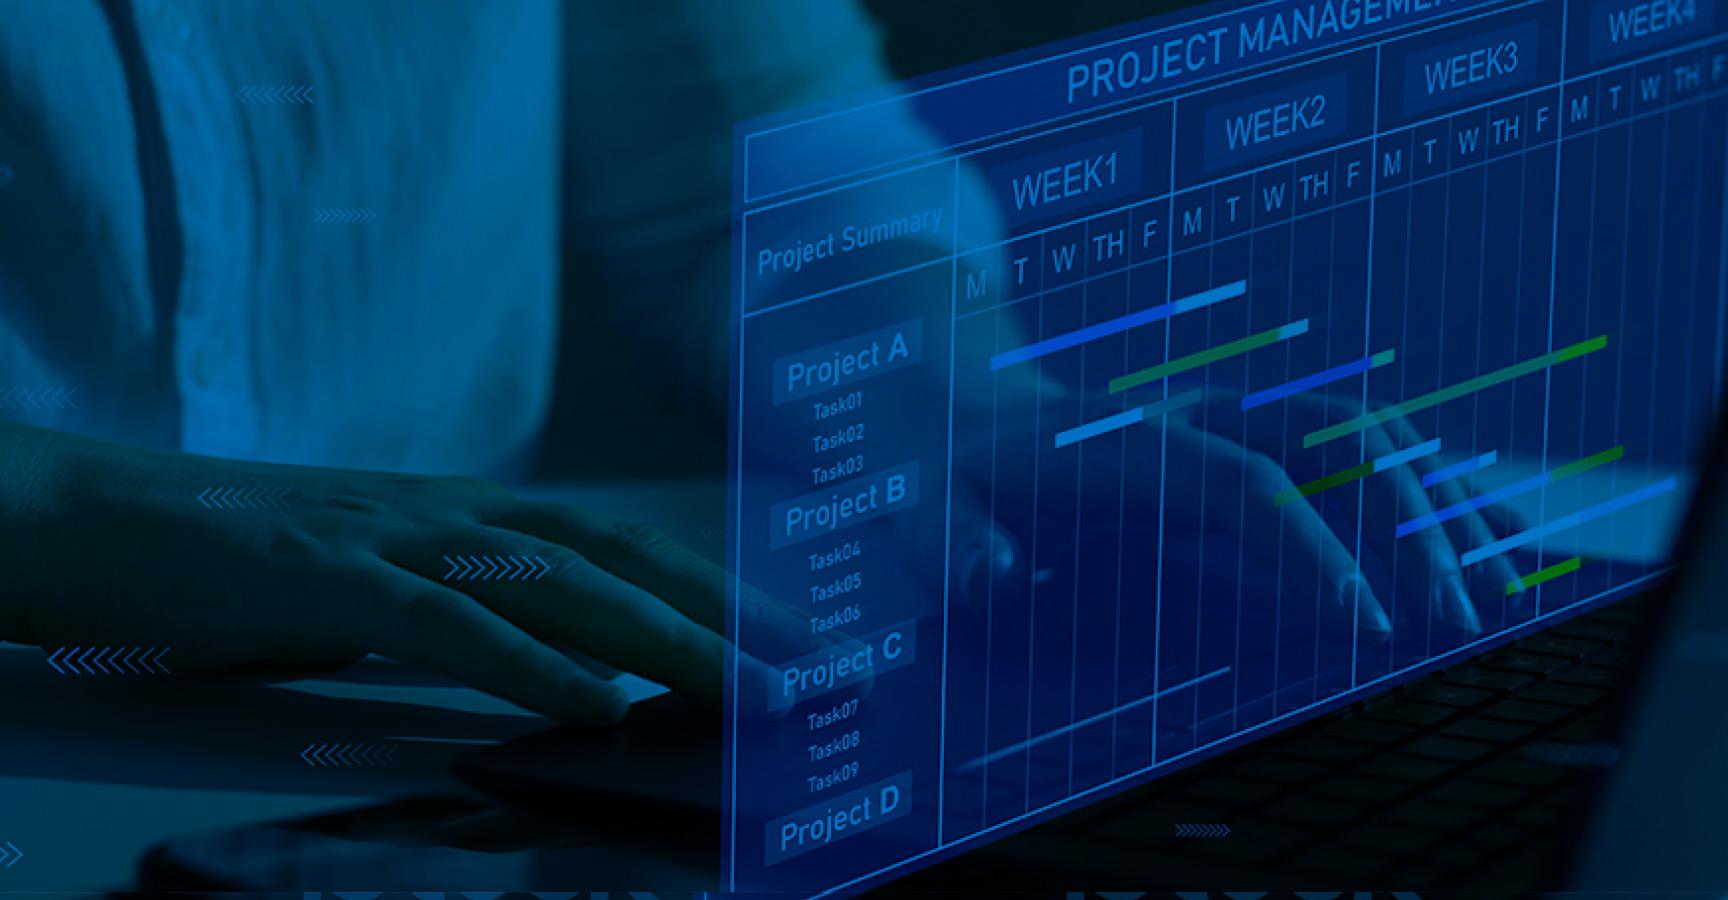 Image for Project Management Organization - Telaid